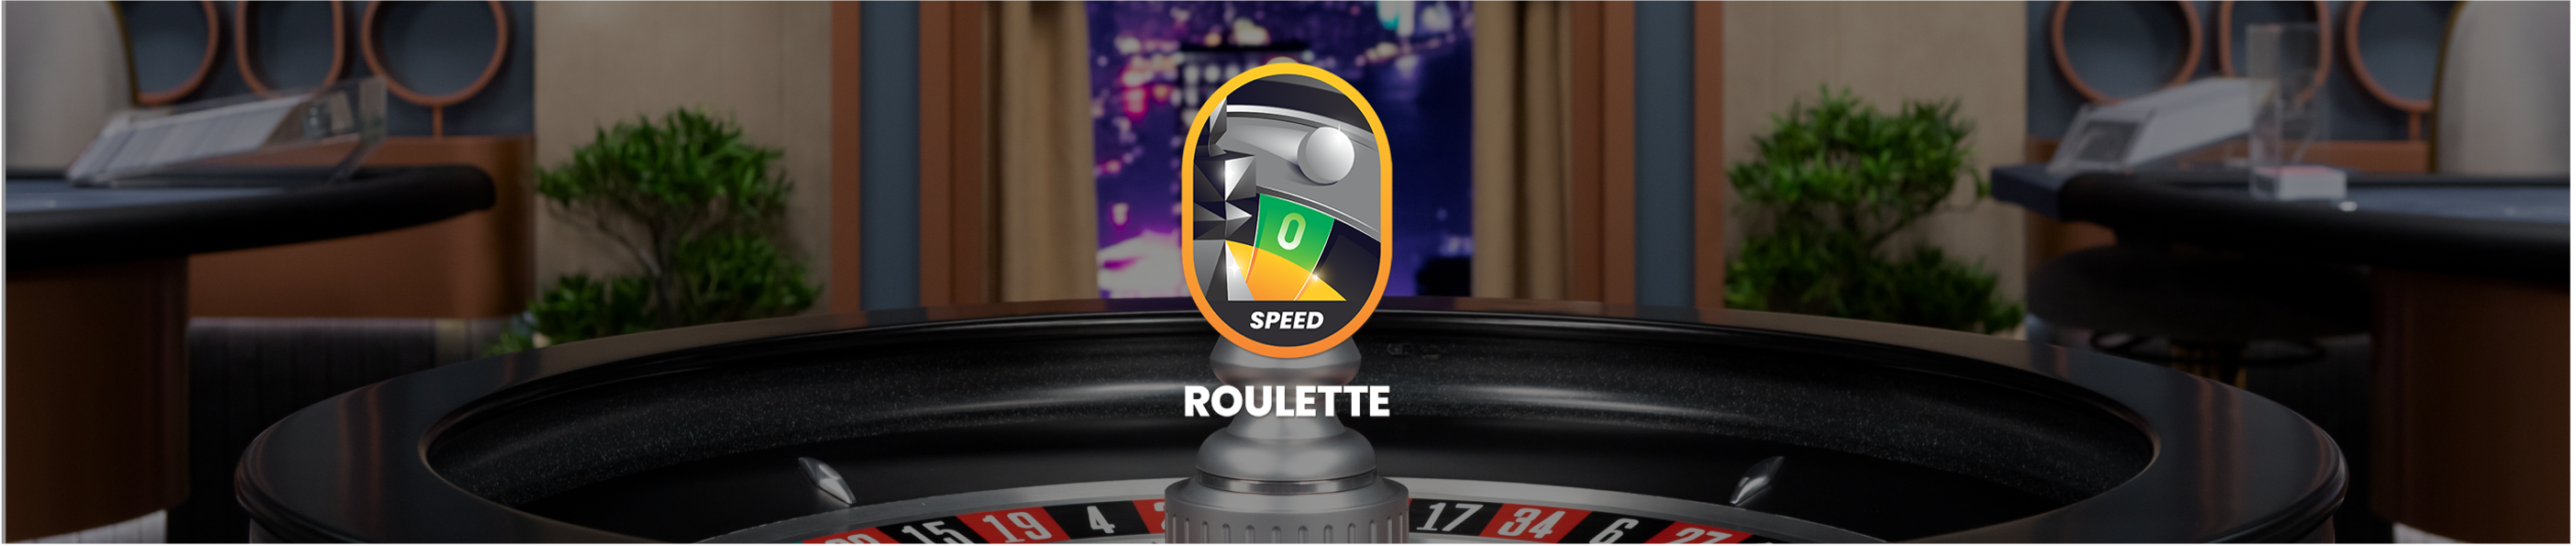 Speed Roulette banner with the logo in the centre against a roulette wheel in the background.